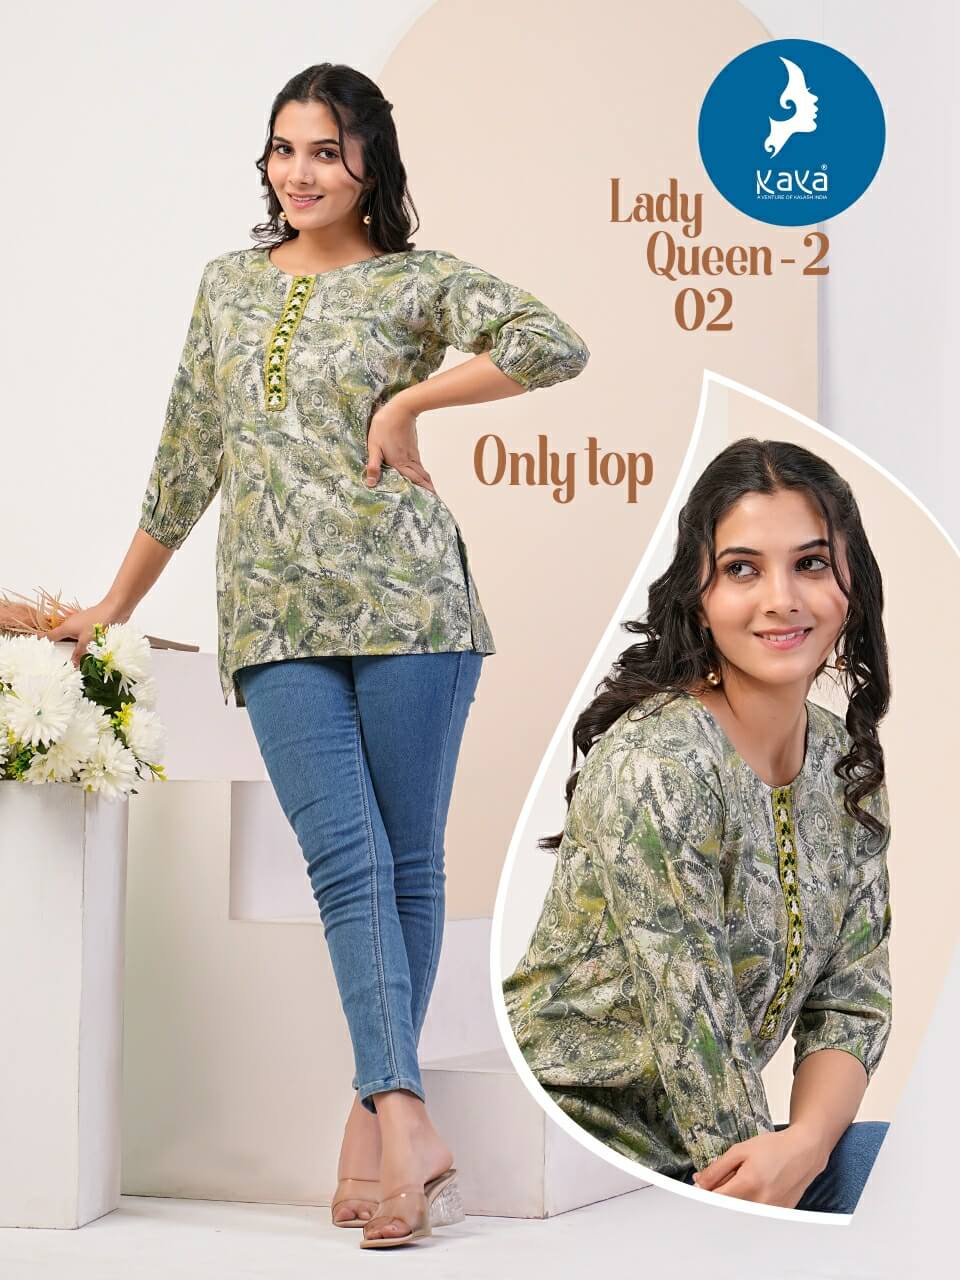 Kaya Lady Queen Vol 2 Ladies Tops Catalog collection 2